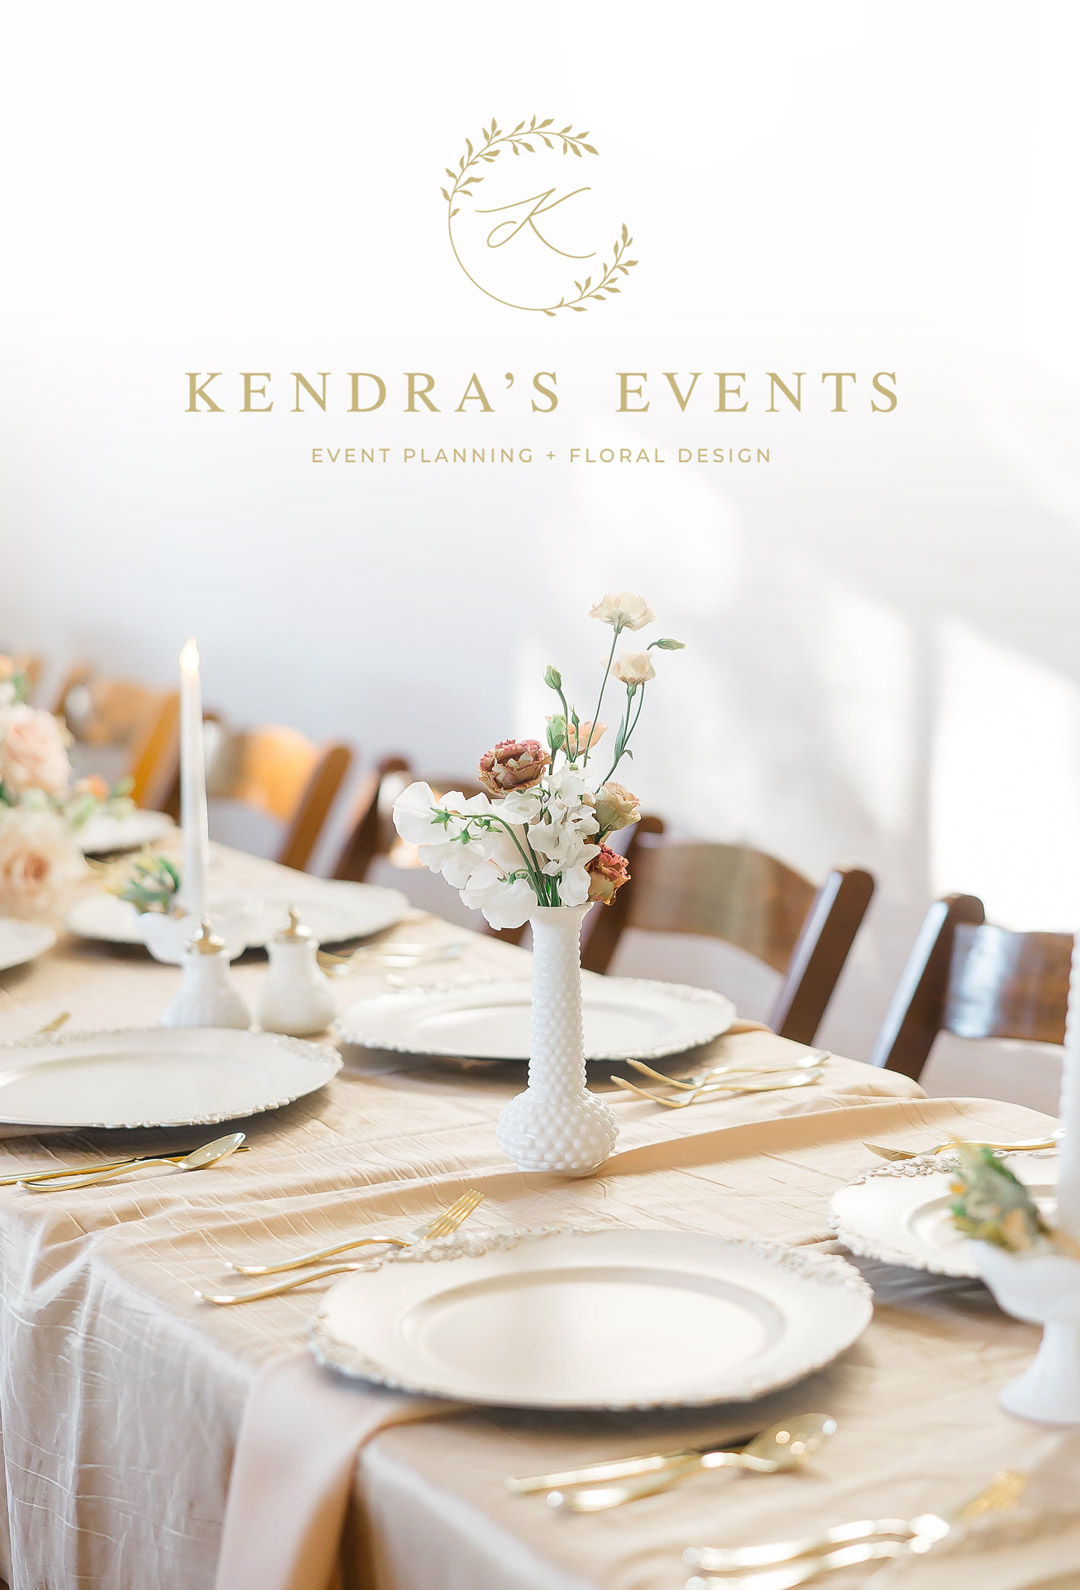 new logo design for wedding planner rebrand overlaying a photo of beautiful wedding table decor